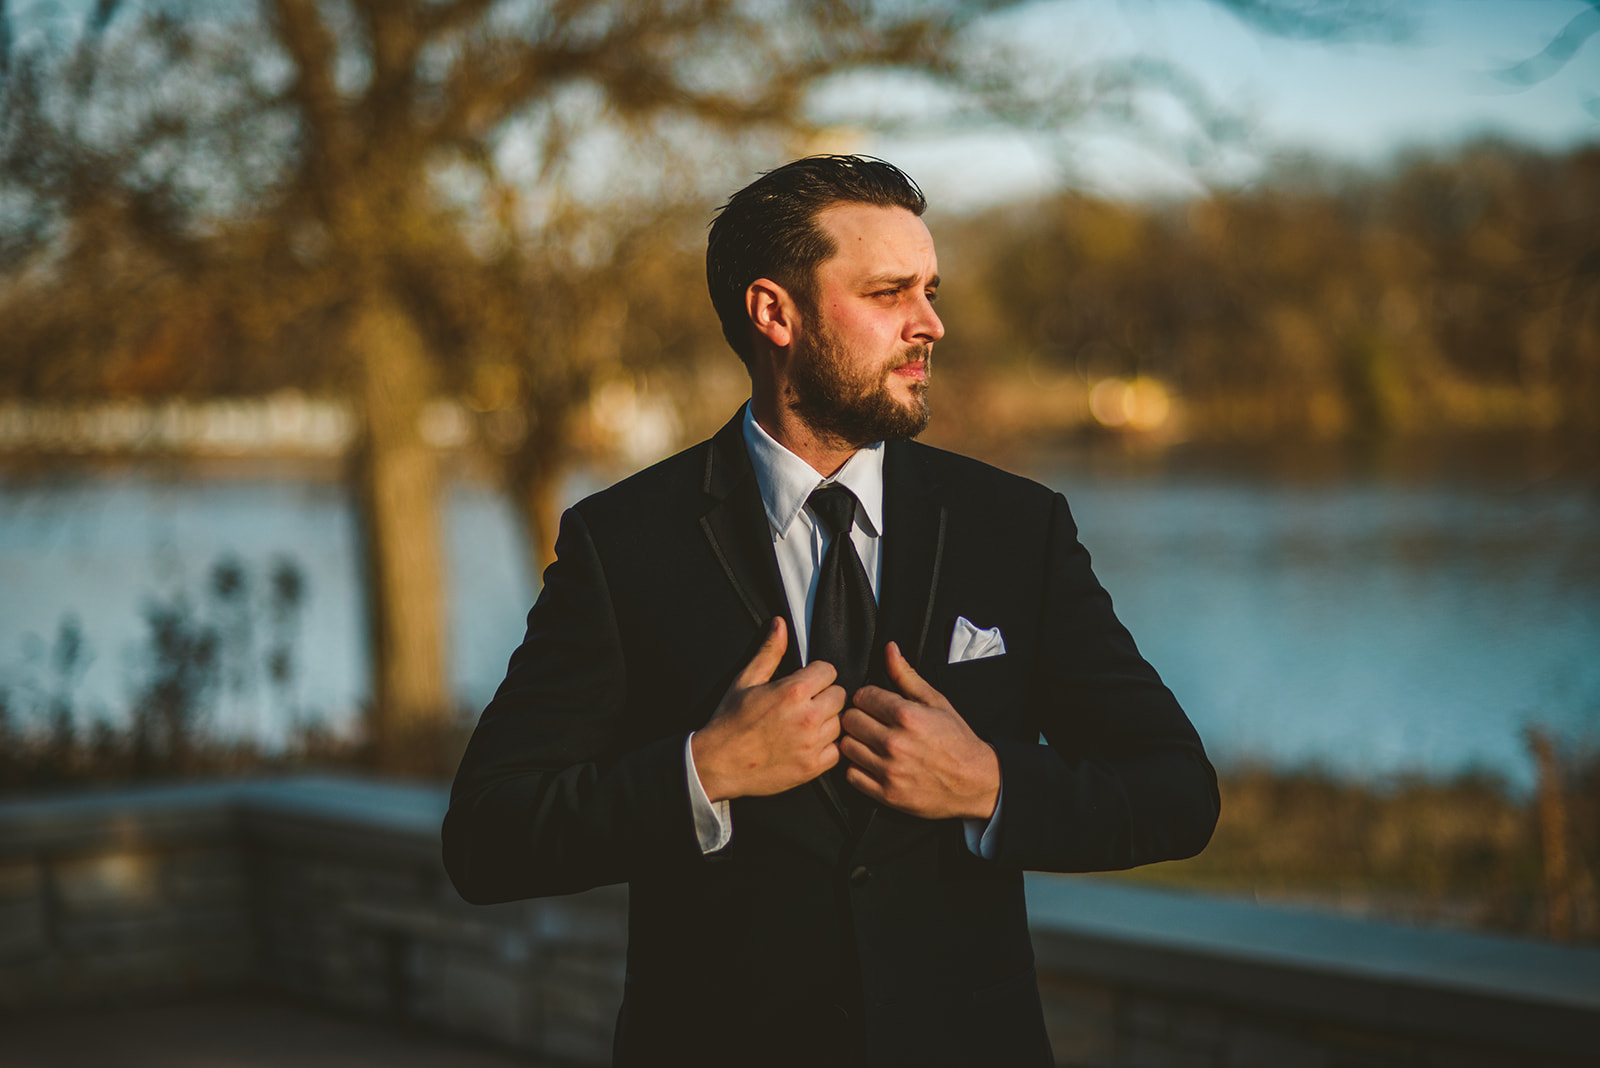 the groom adjusting jacket in the setting fall sun before his wedding